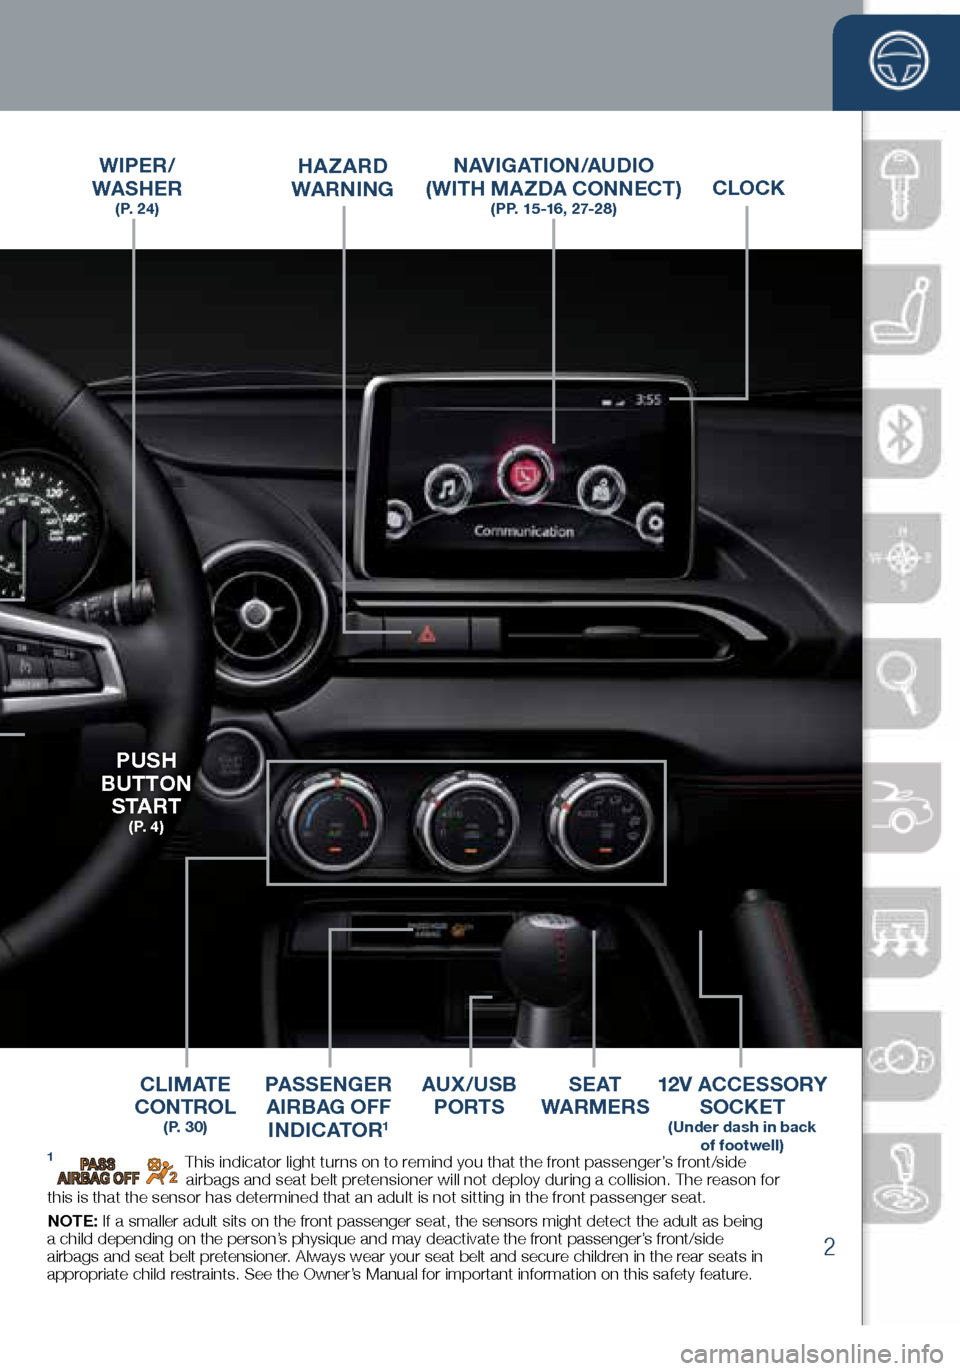 MAZDA MODEL MX-5 2016  Smart Start Guide (in English) 2
Driver’s View
CLOCK
AUX /USB PORTS S E AT  
 
WARMERS
C L I M AT E  
CONTROL   
( P.  3 0 )
PASSENGER 
AIRBAG OFF  INDICATOR
1
HAZARD  WARNING
12V ACCESSORY  SOCKET
(Under dash in back   
of footw